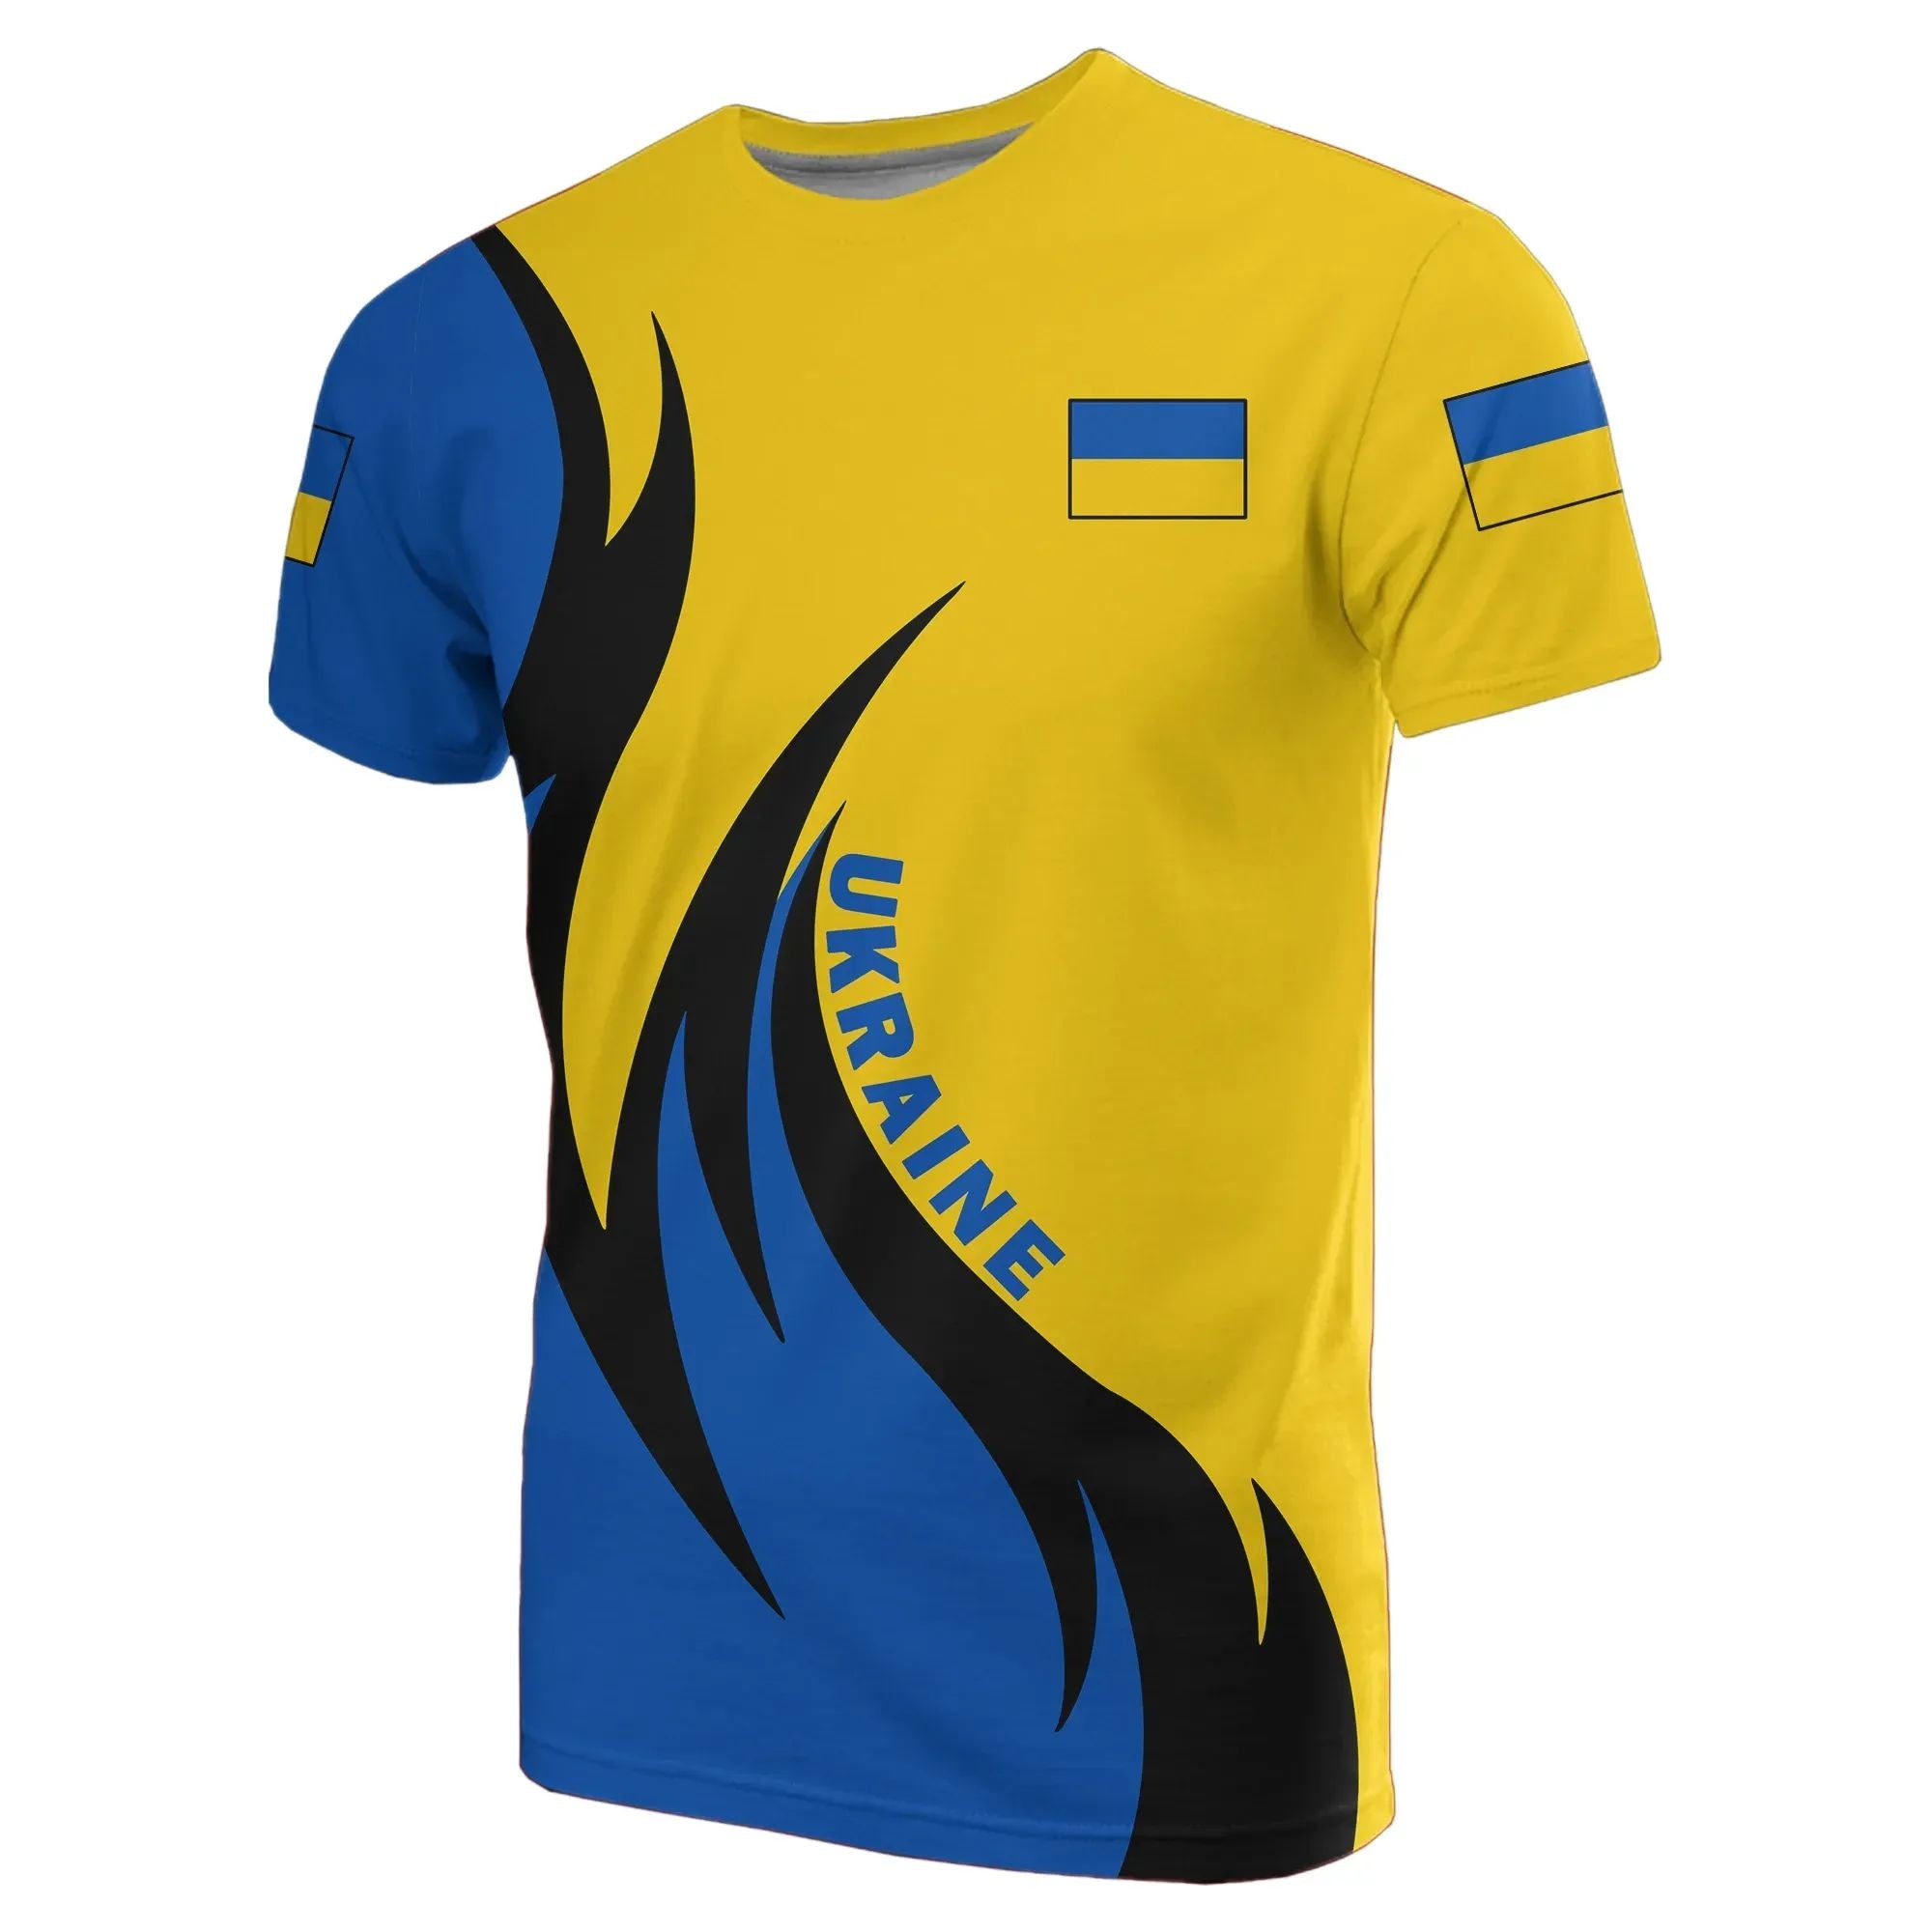 ukraine-coat-of-arms-t-shirt-fire-style